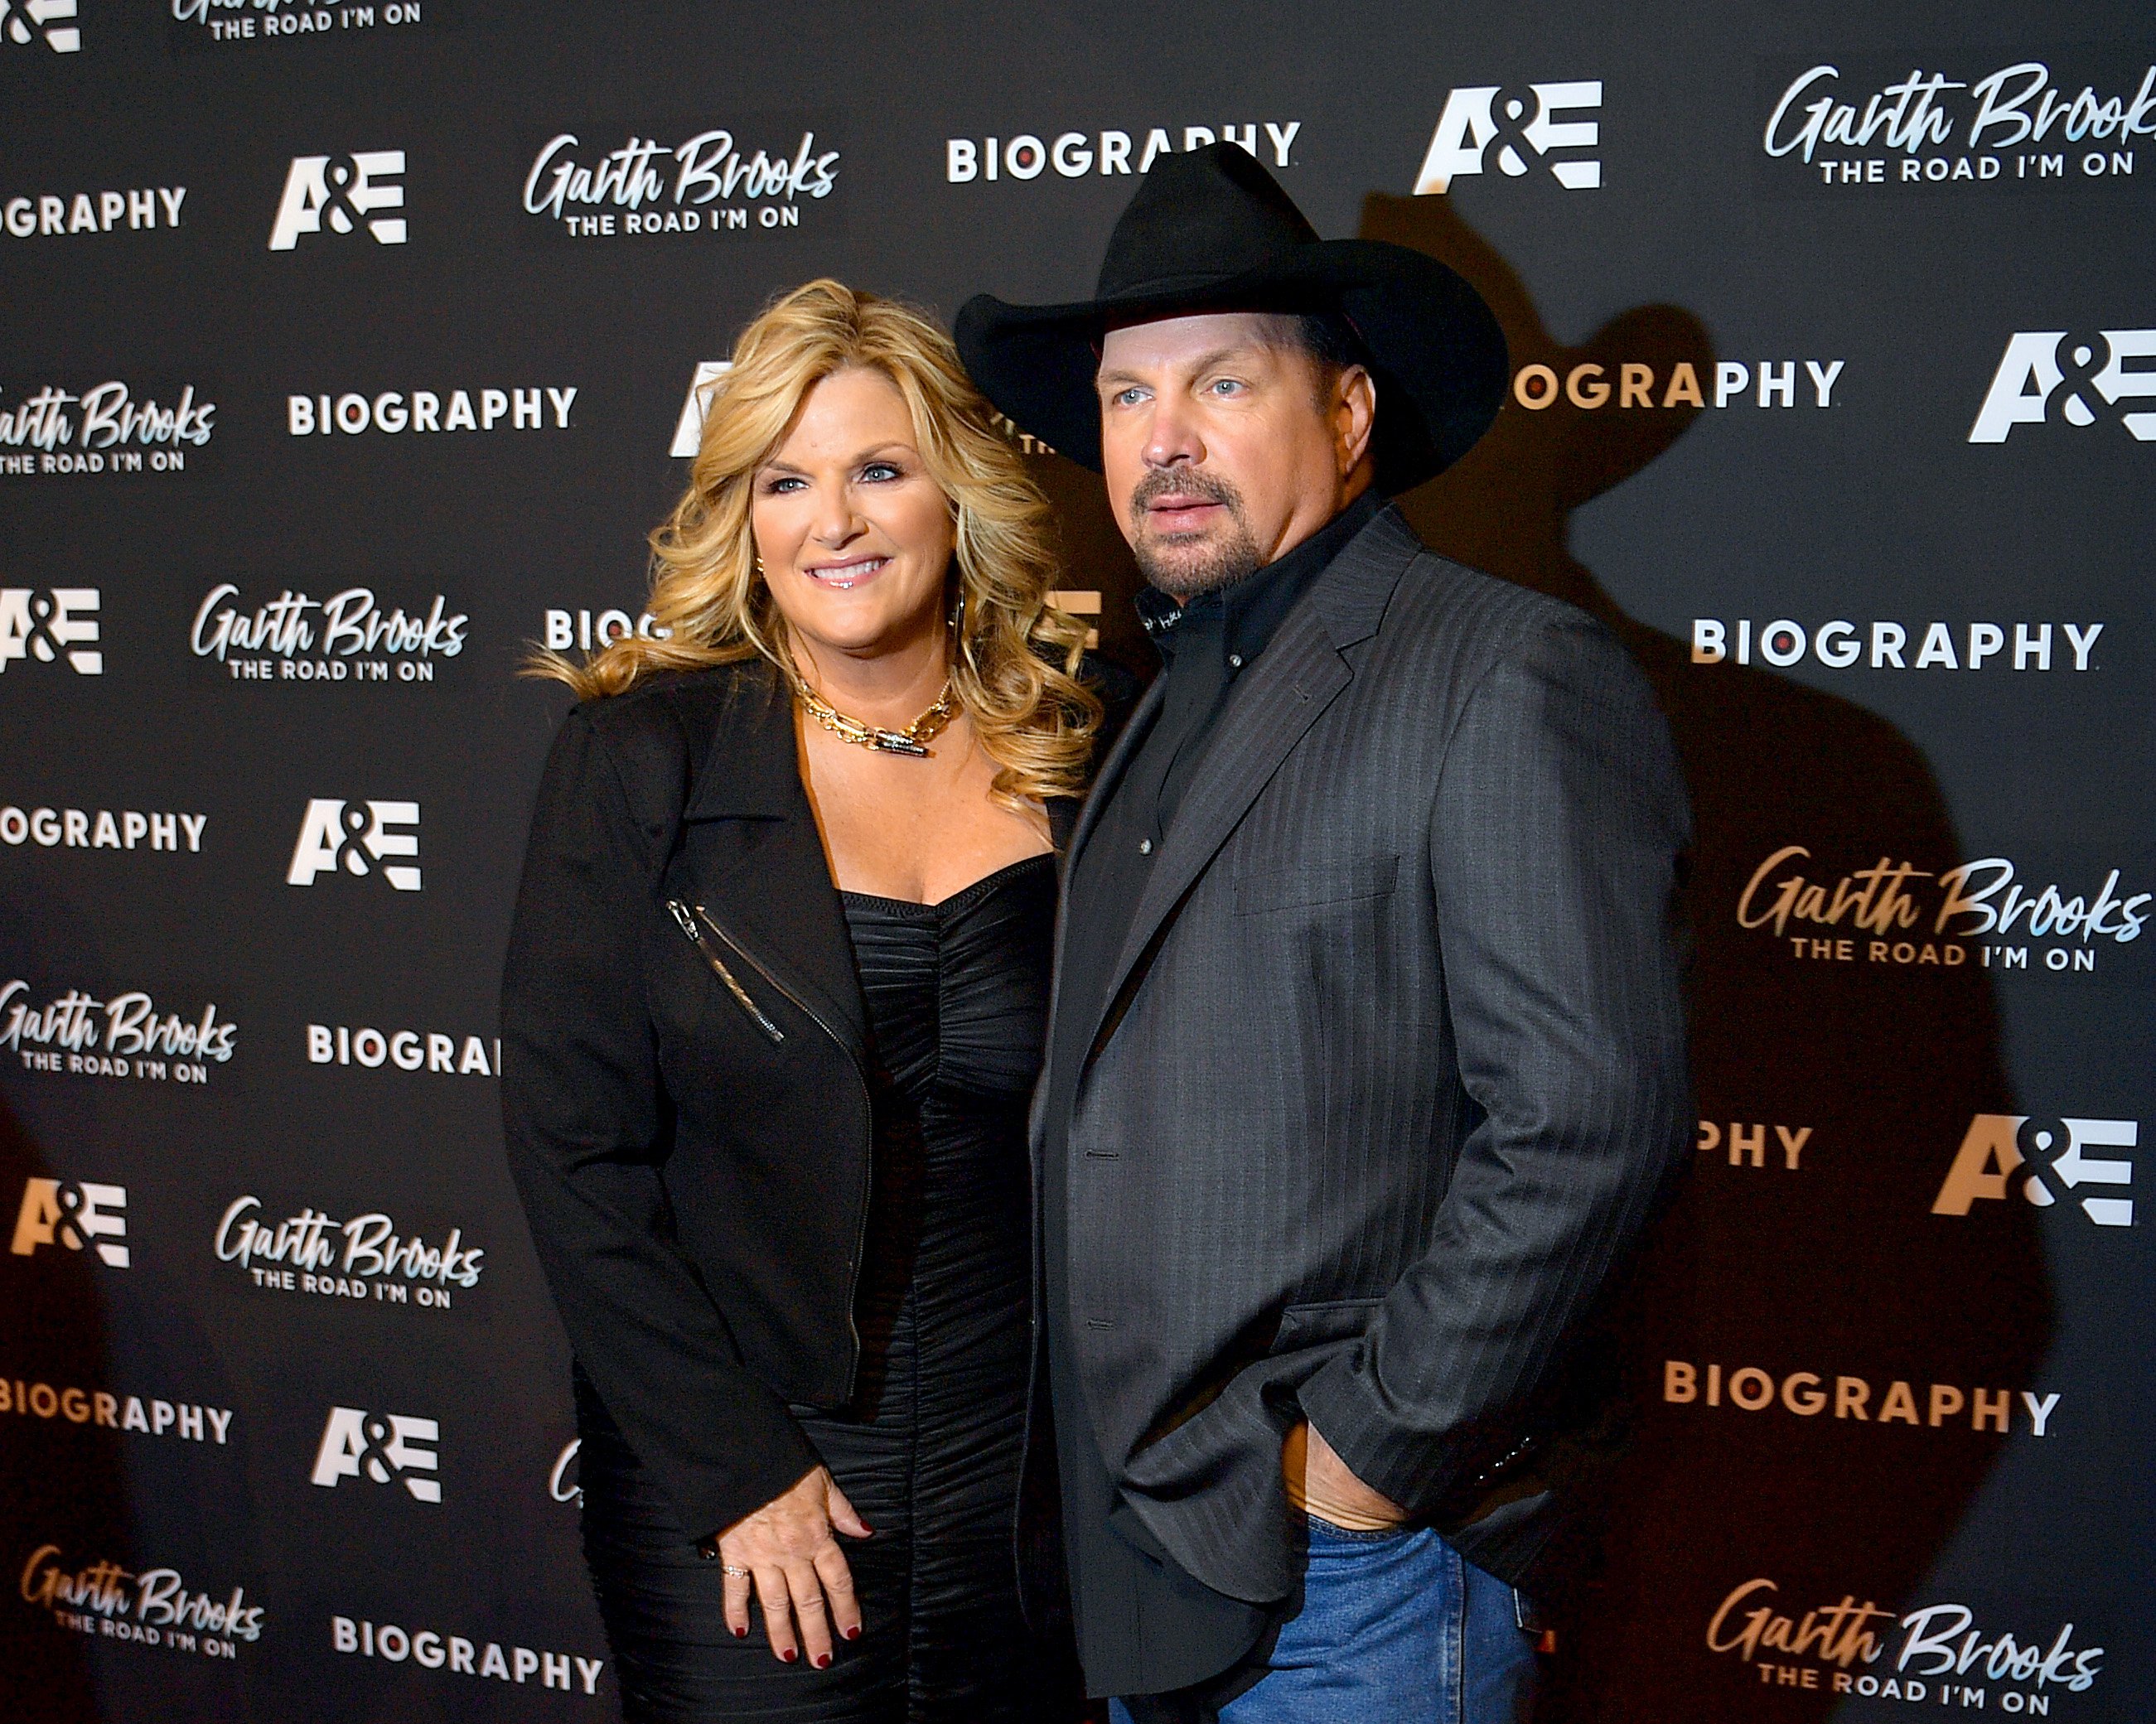 risha Yearwood and Garth Brooks attend the "Garth Brooks: The Road I'm On" Biography Celebration at The Bowery Hotel on November 18, 2019 in New York City. | Source: Getty Images